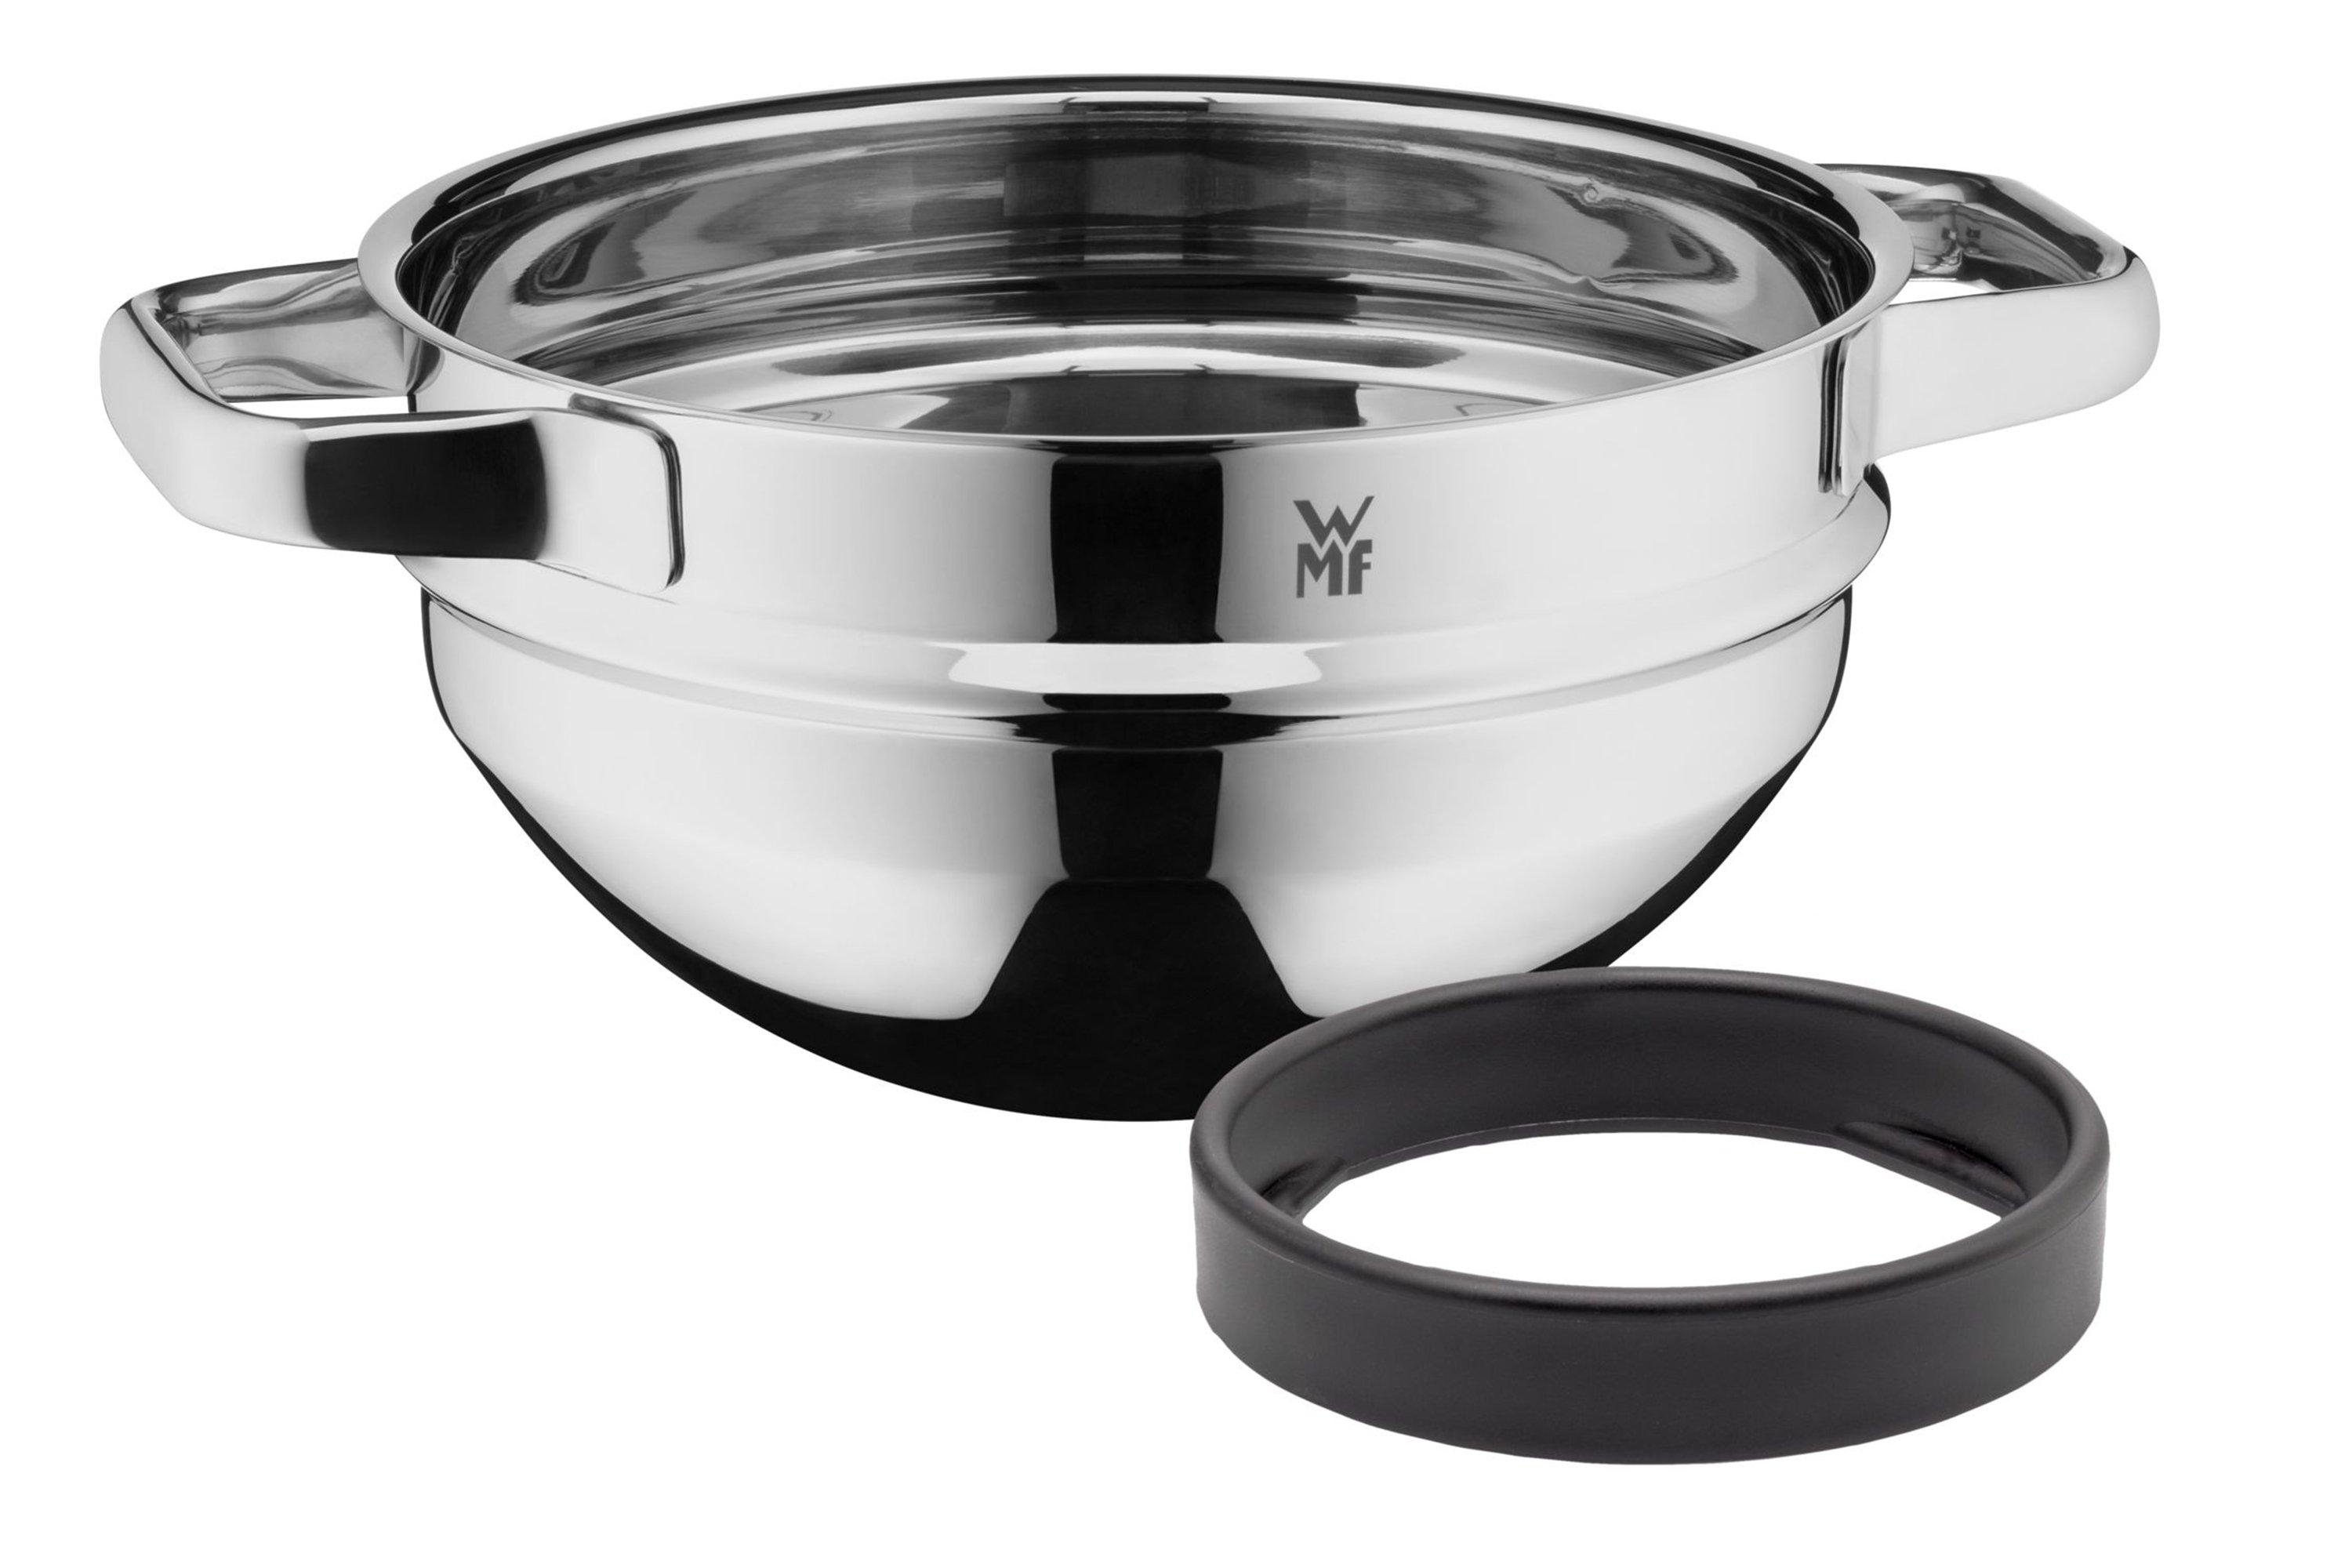 WMF 790046380 Compact Cuisine 4-Piece Induction Saucepan Set with Glass  Lid, Polished Cromargan Stainless Steel, Pot Set Uncoated, Inside Scale